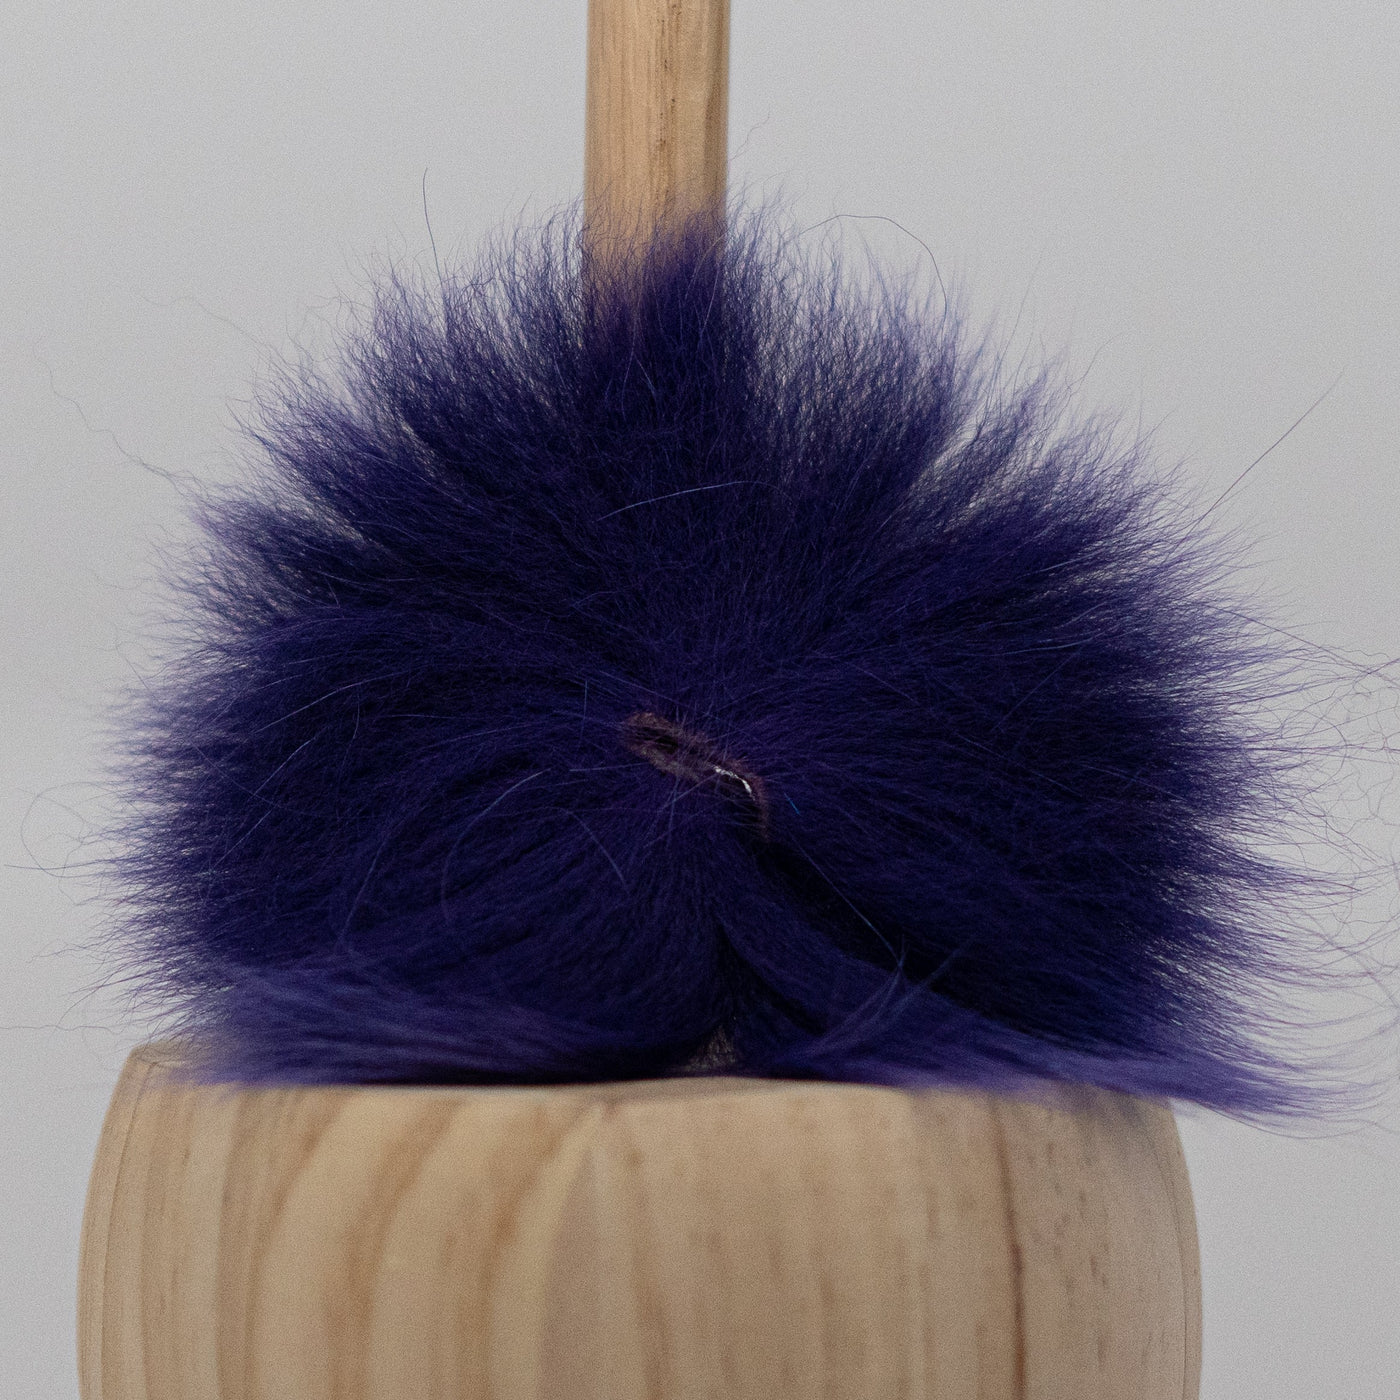 ARCTIC FOX TAIL HAIR - 12 color options